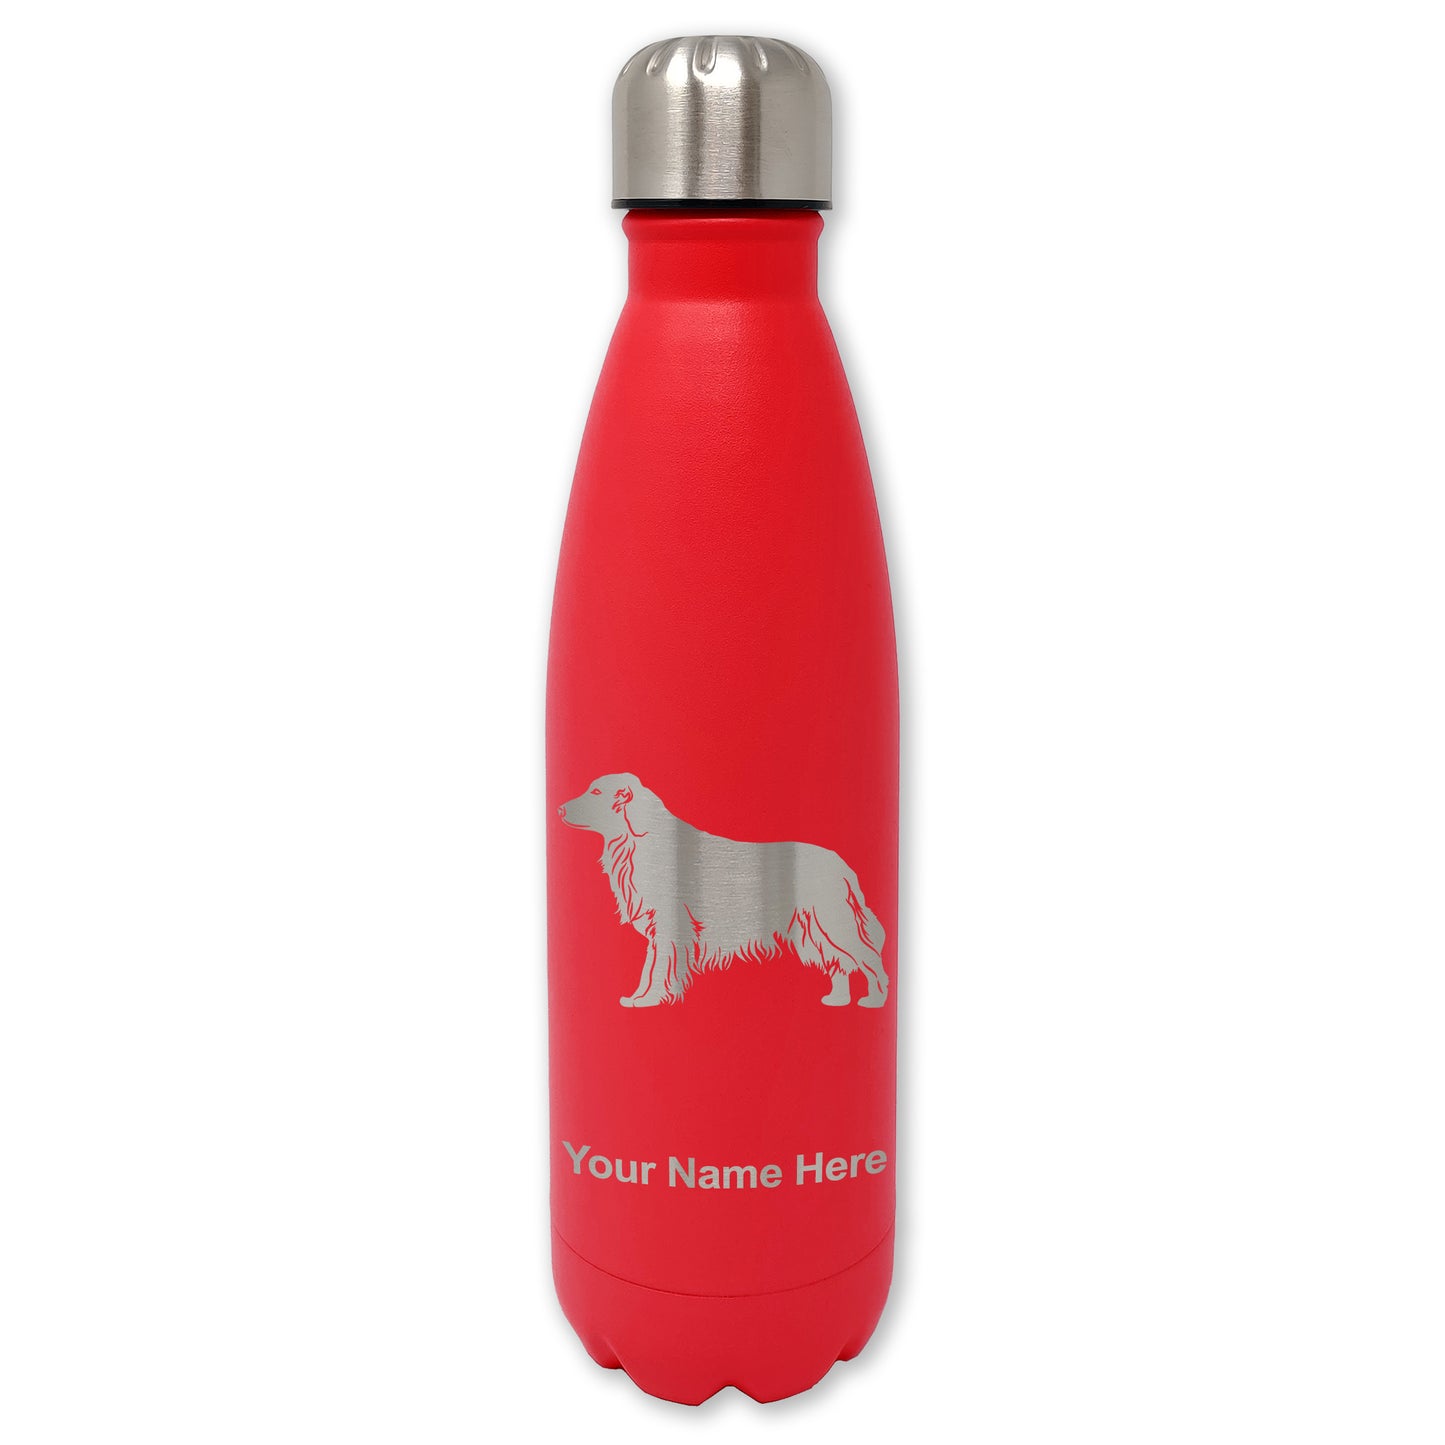 LaserGram Double Wall Water Bottle, Golden Retriever Dog, Personalized Engraving Included